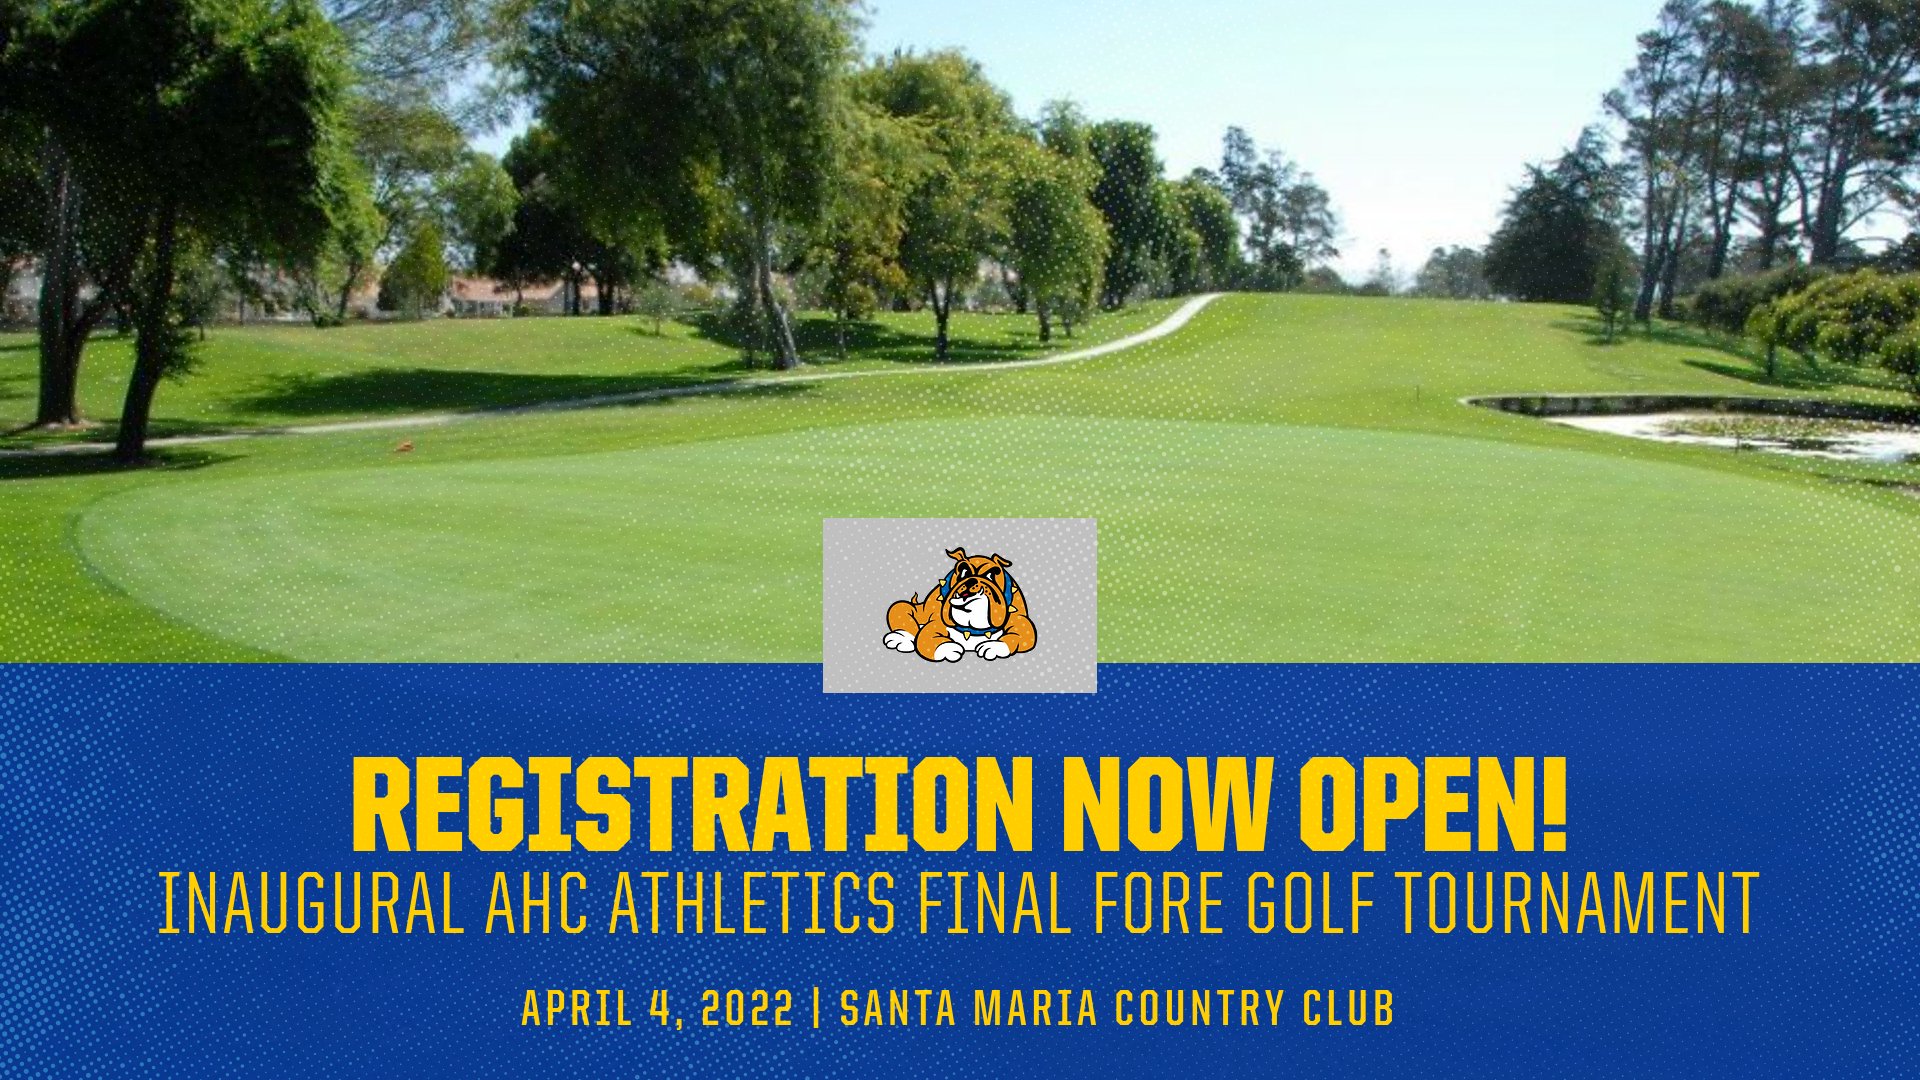 Registration Now Open: AHC Athletics Inaugural Final Fore Golf Tournament Set for April 4th